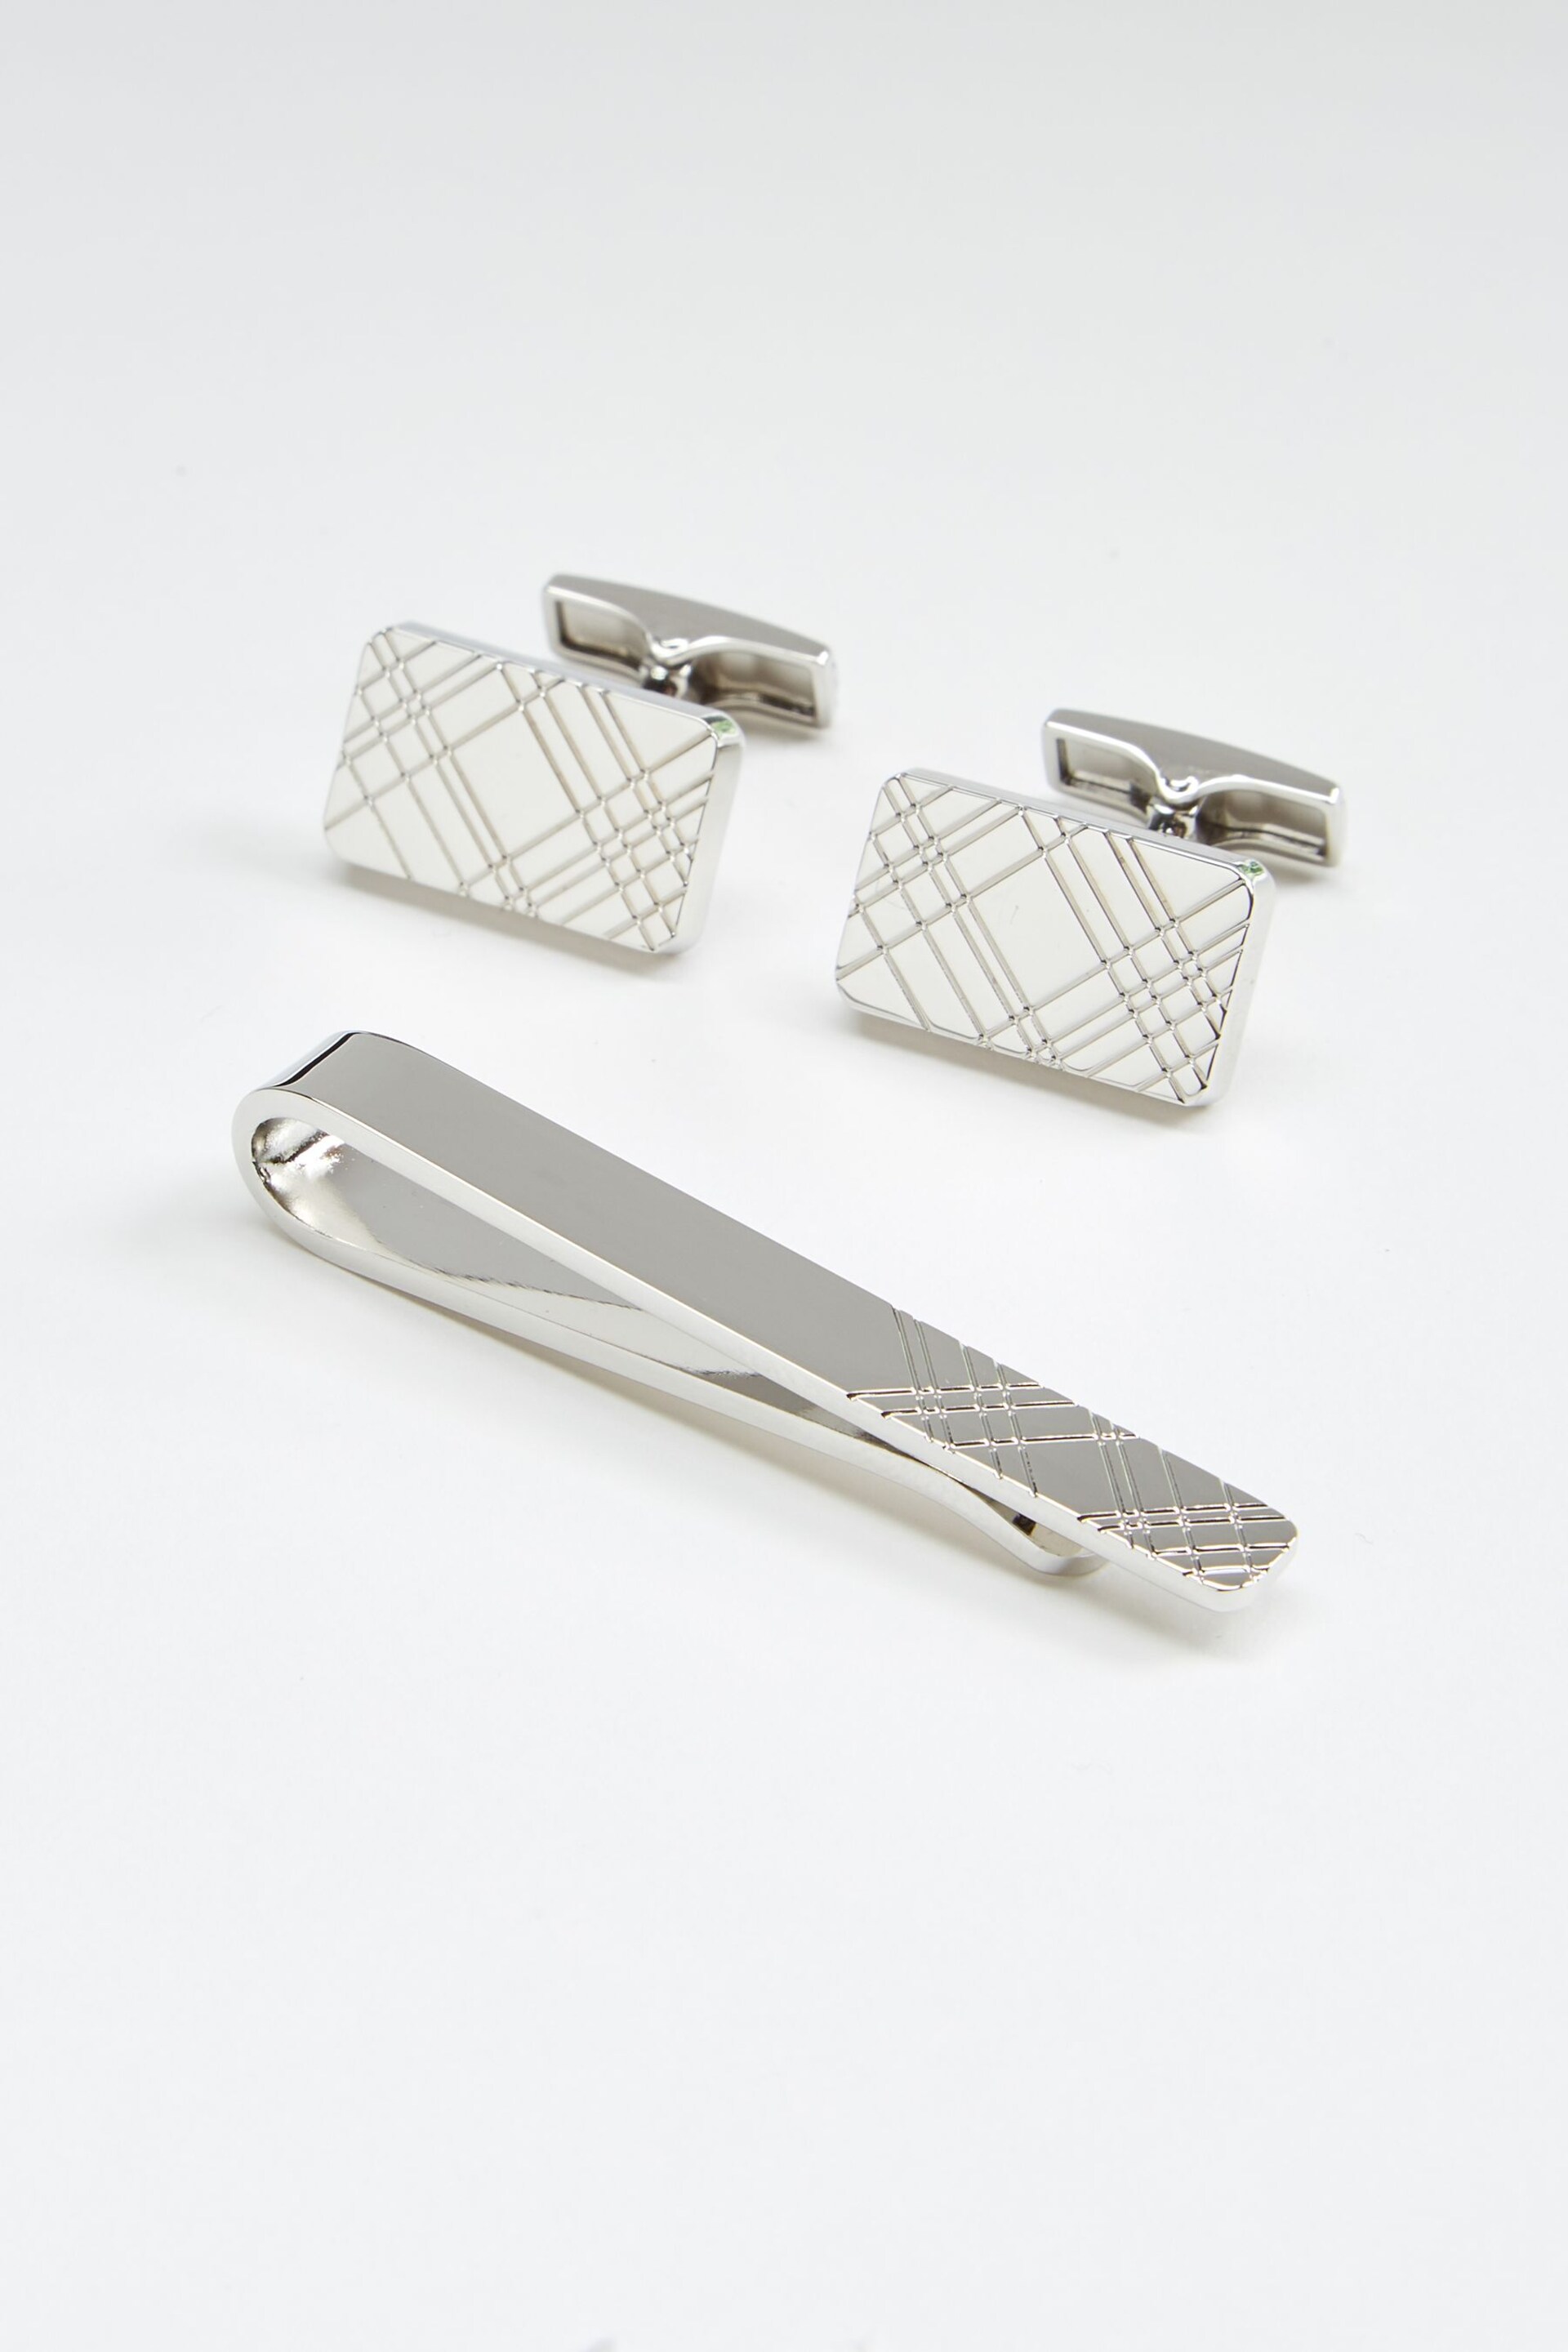 Silver Tone Cufflink And Tie Clip Set - Image 4 of 6